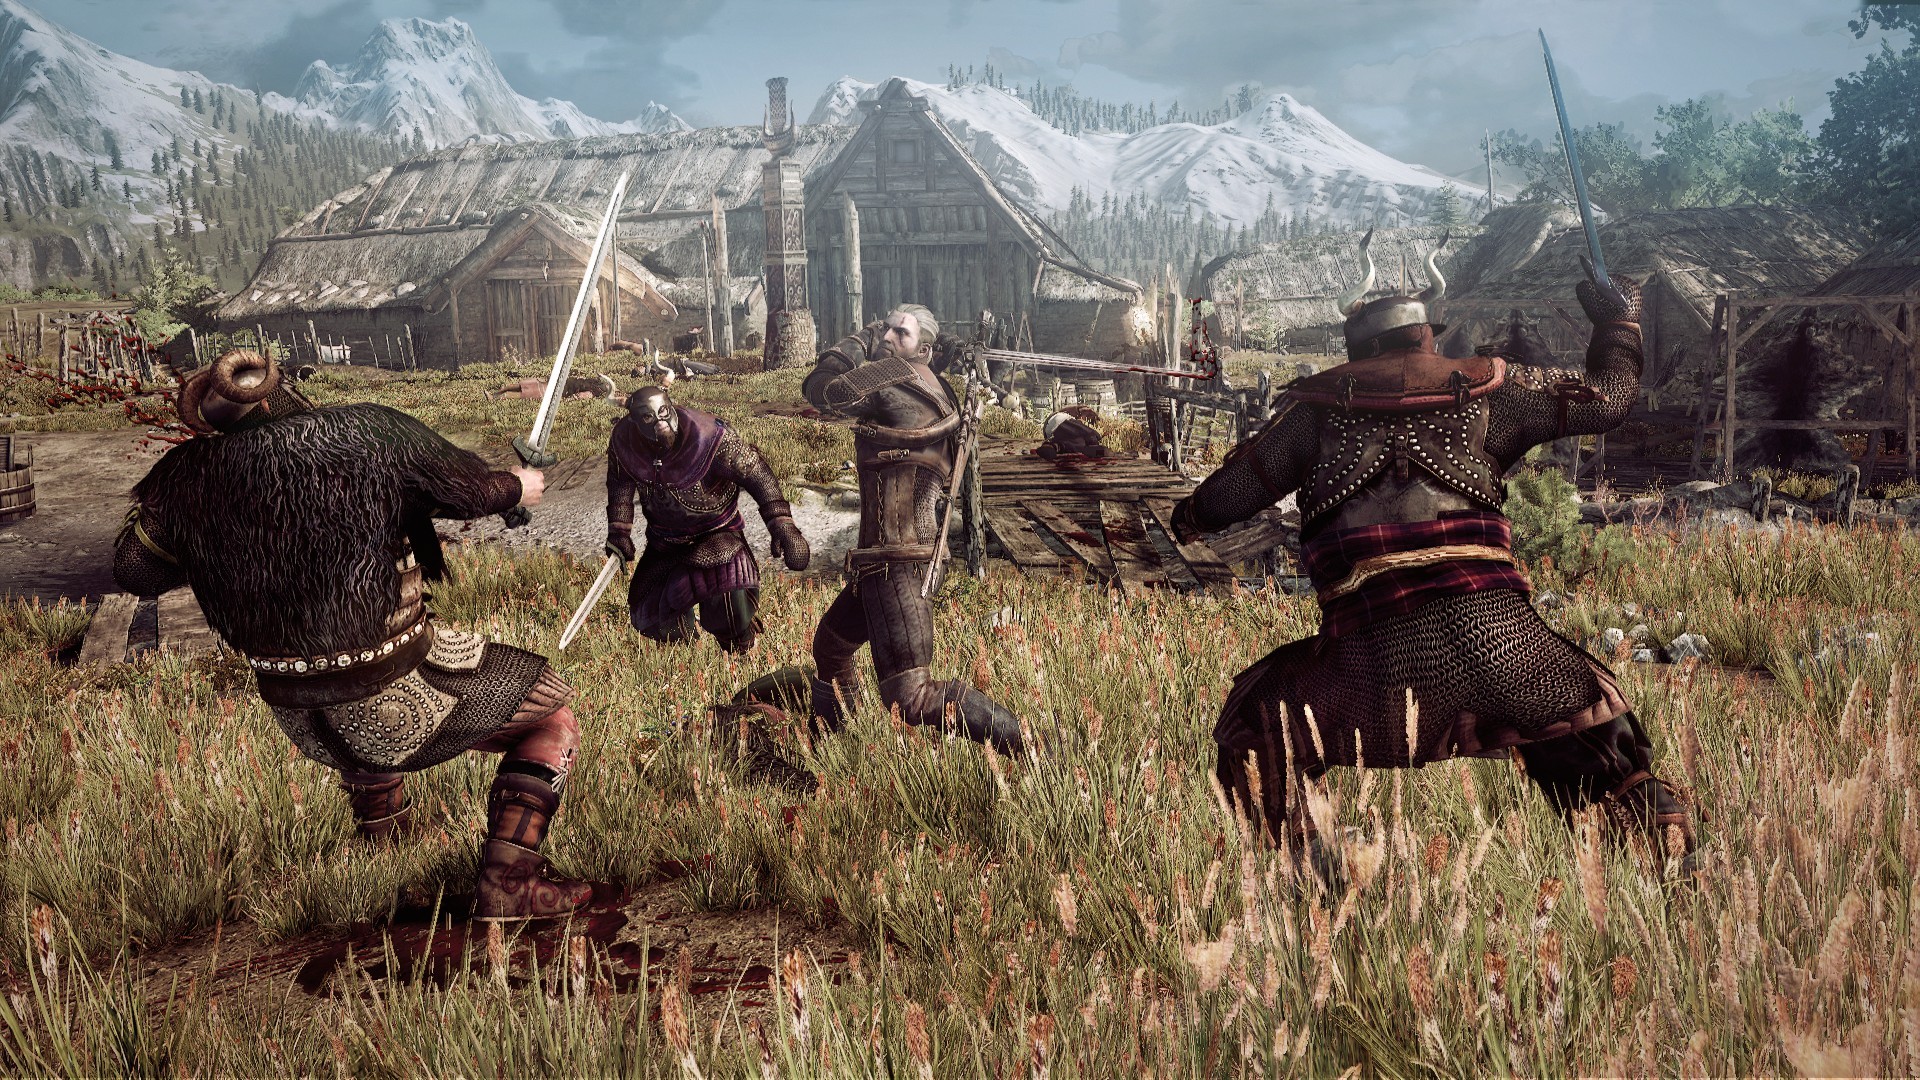 Review: The Witcher 3: Wild Hunt